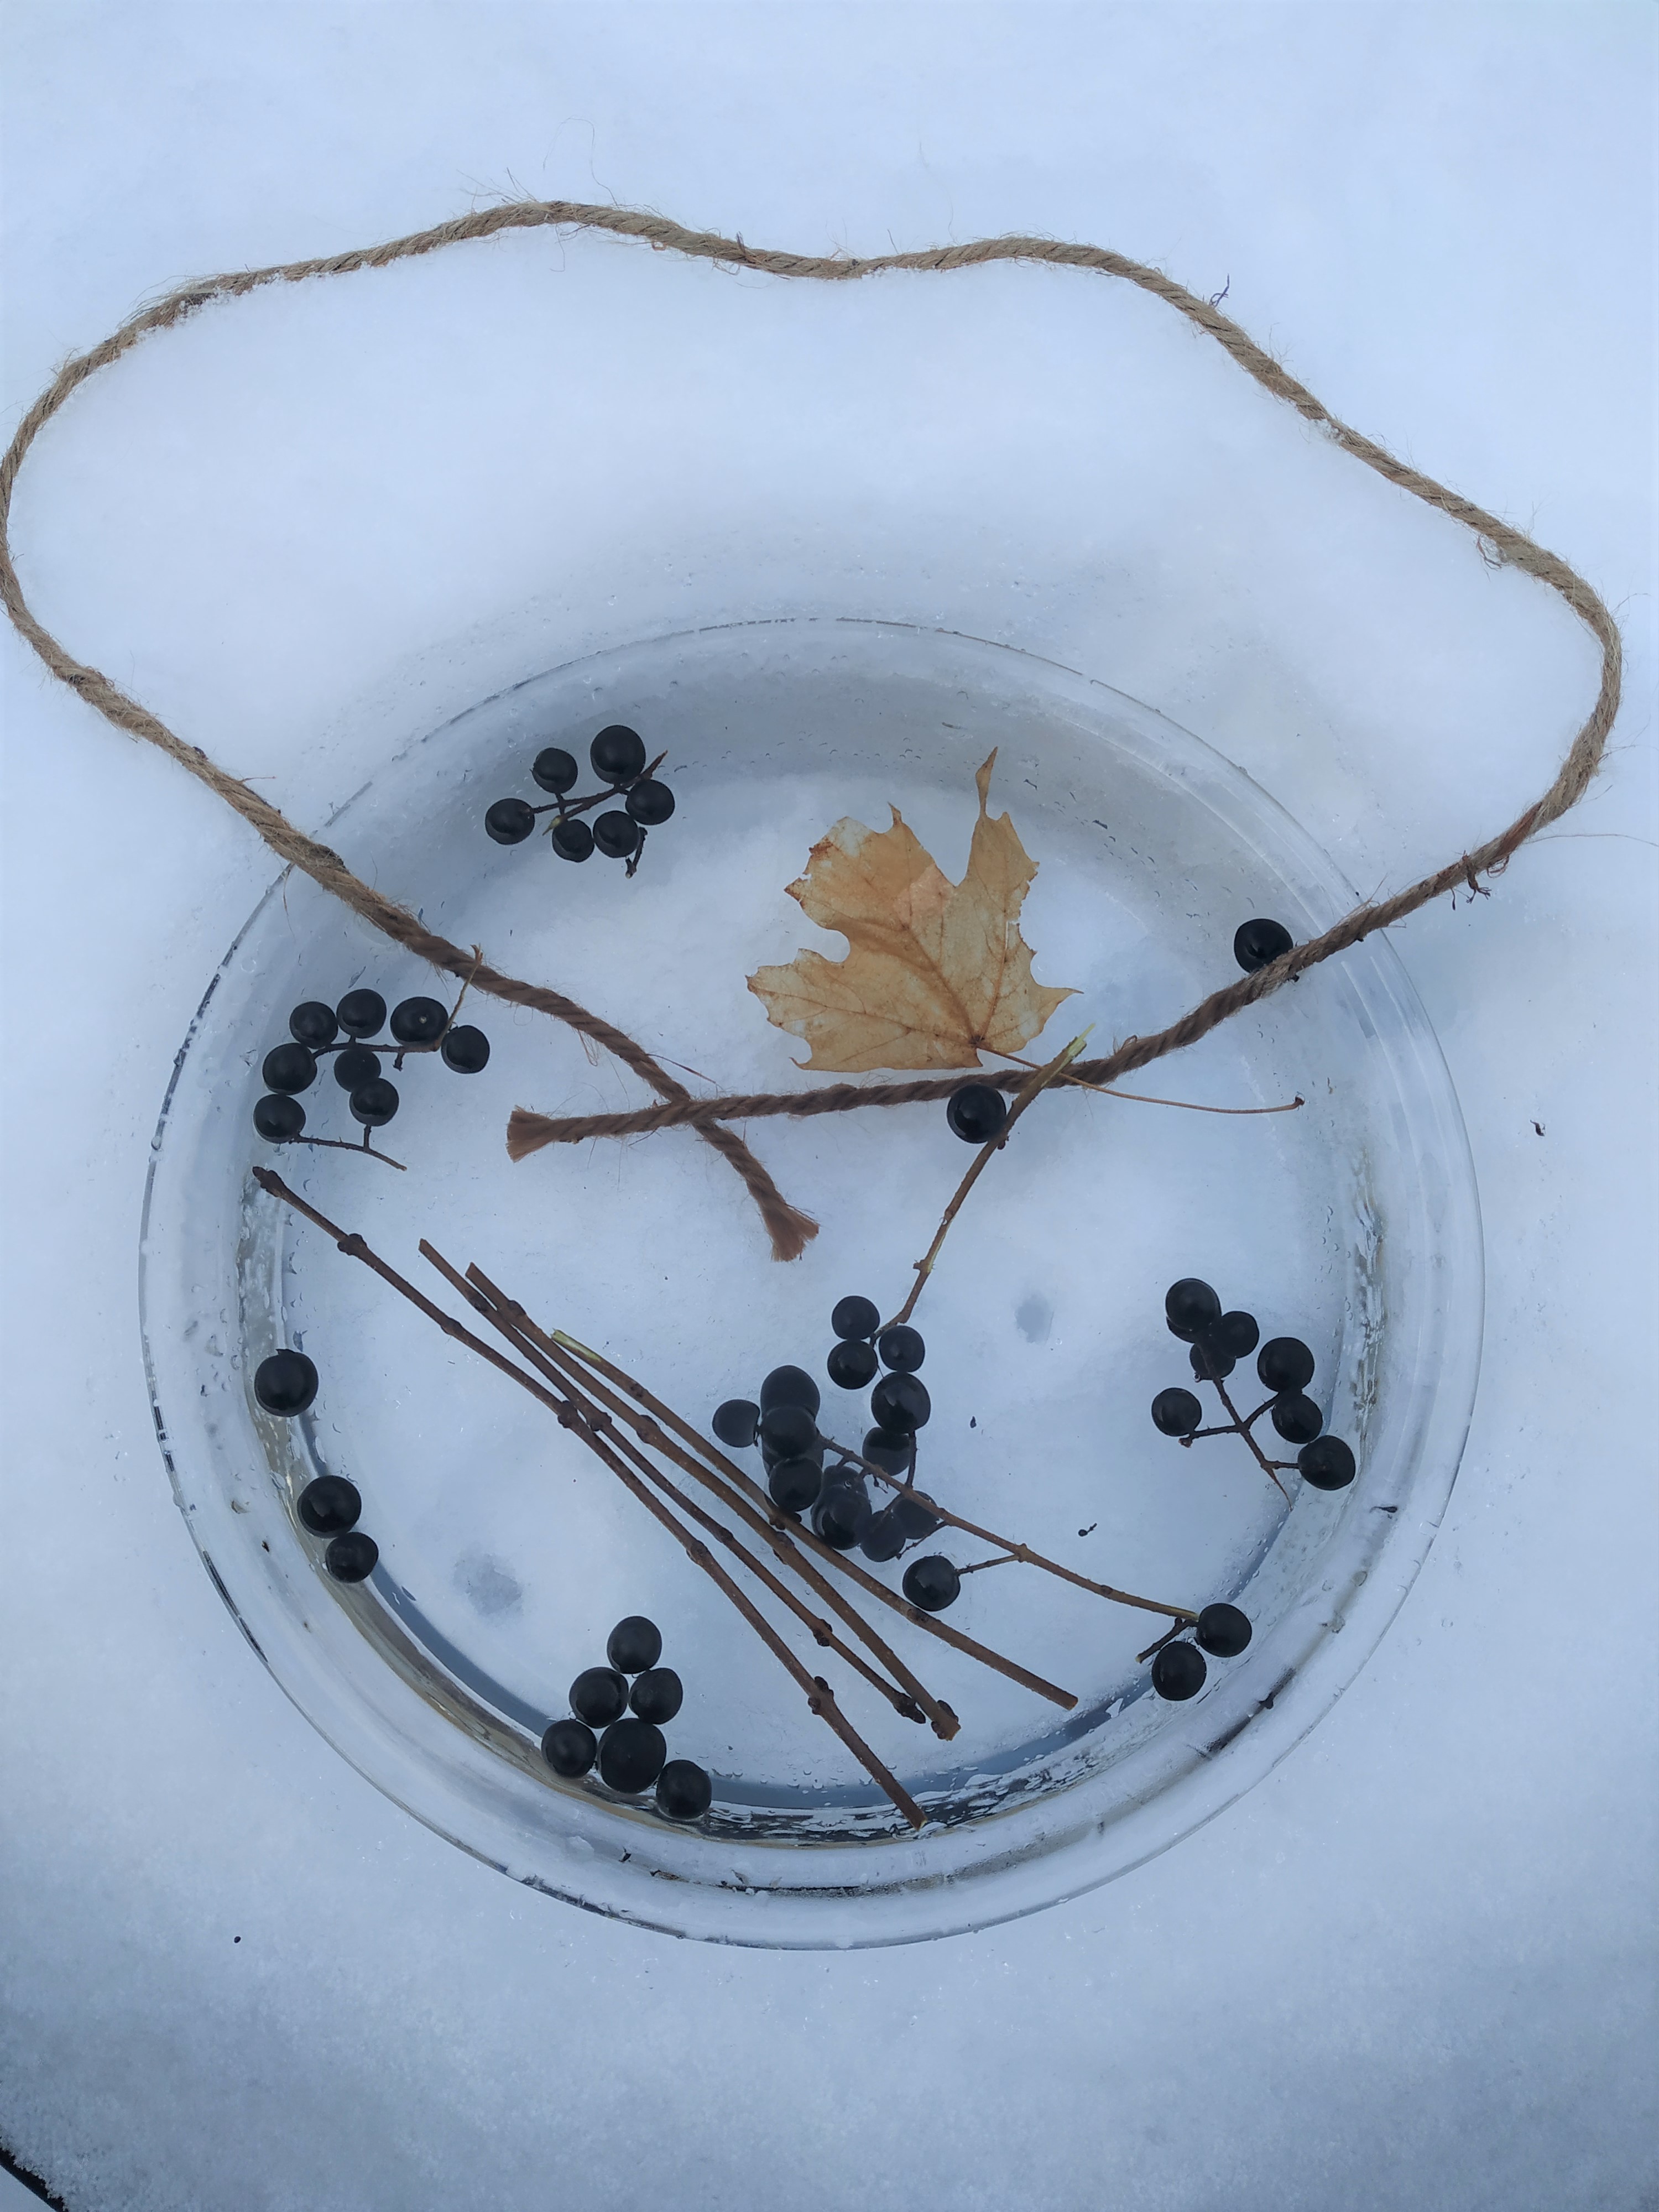 Adding berries, leaves and sticks to the water bowl.